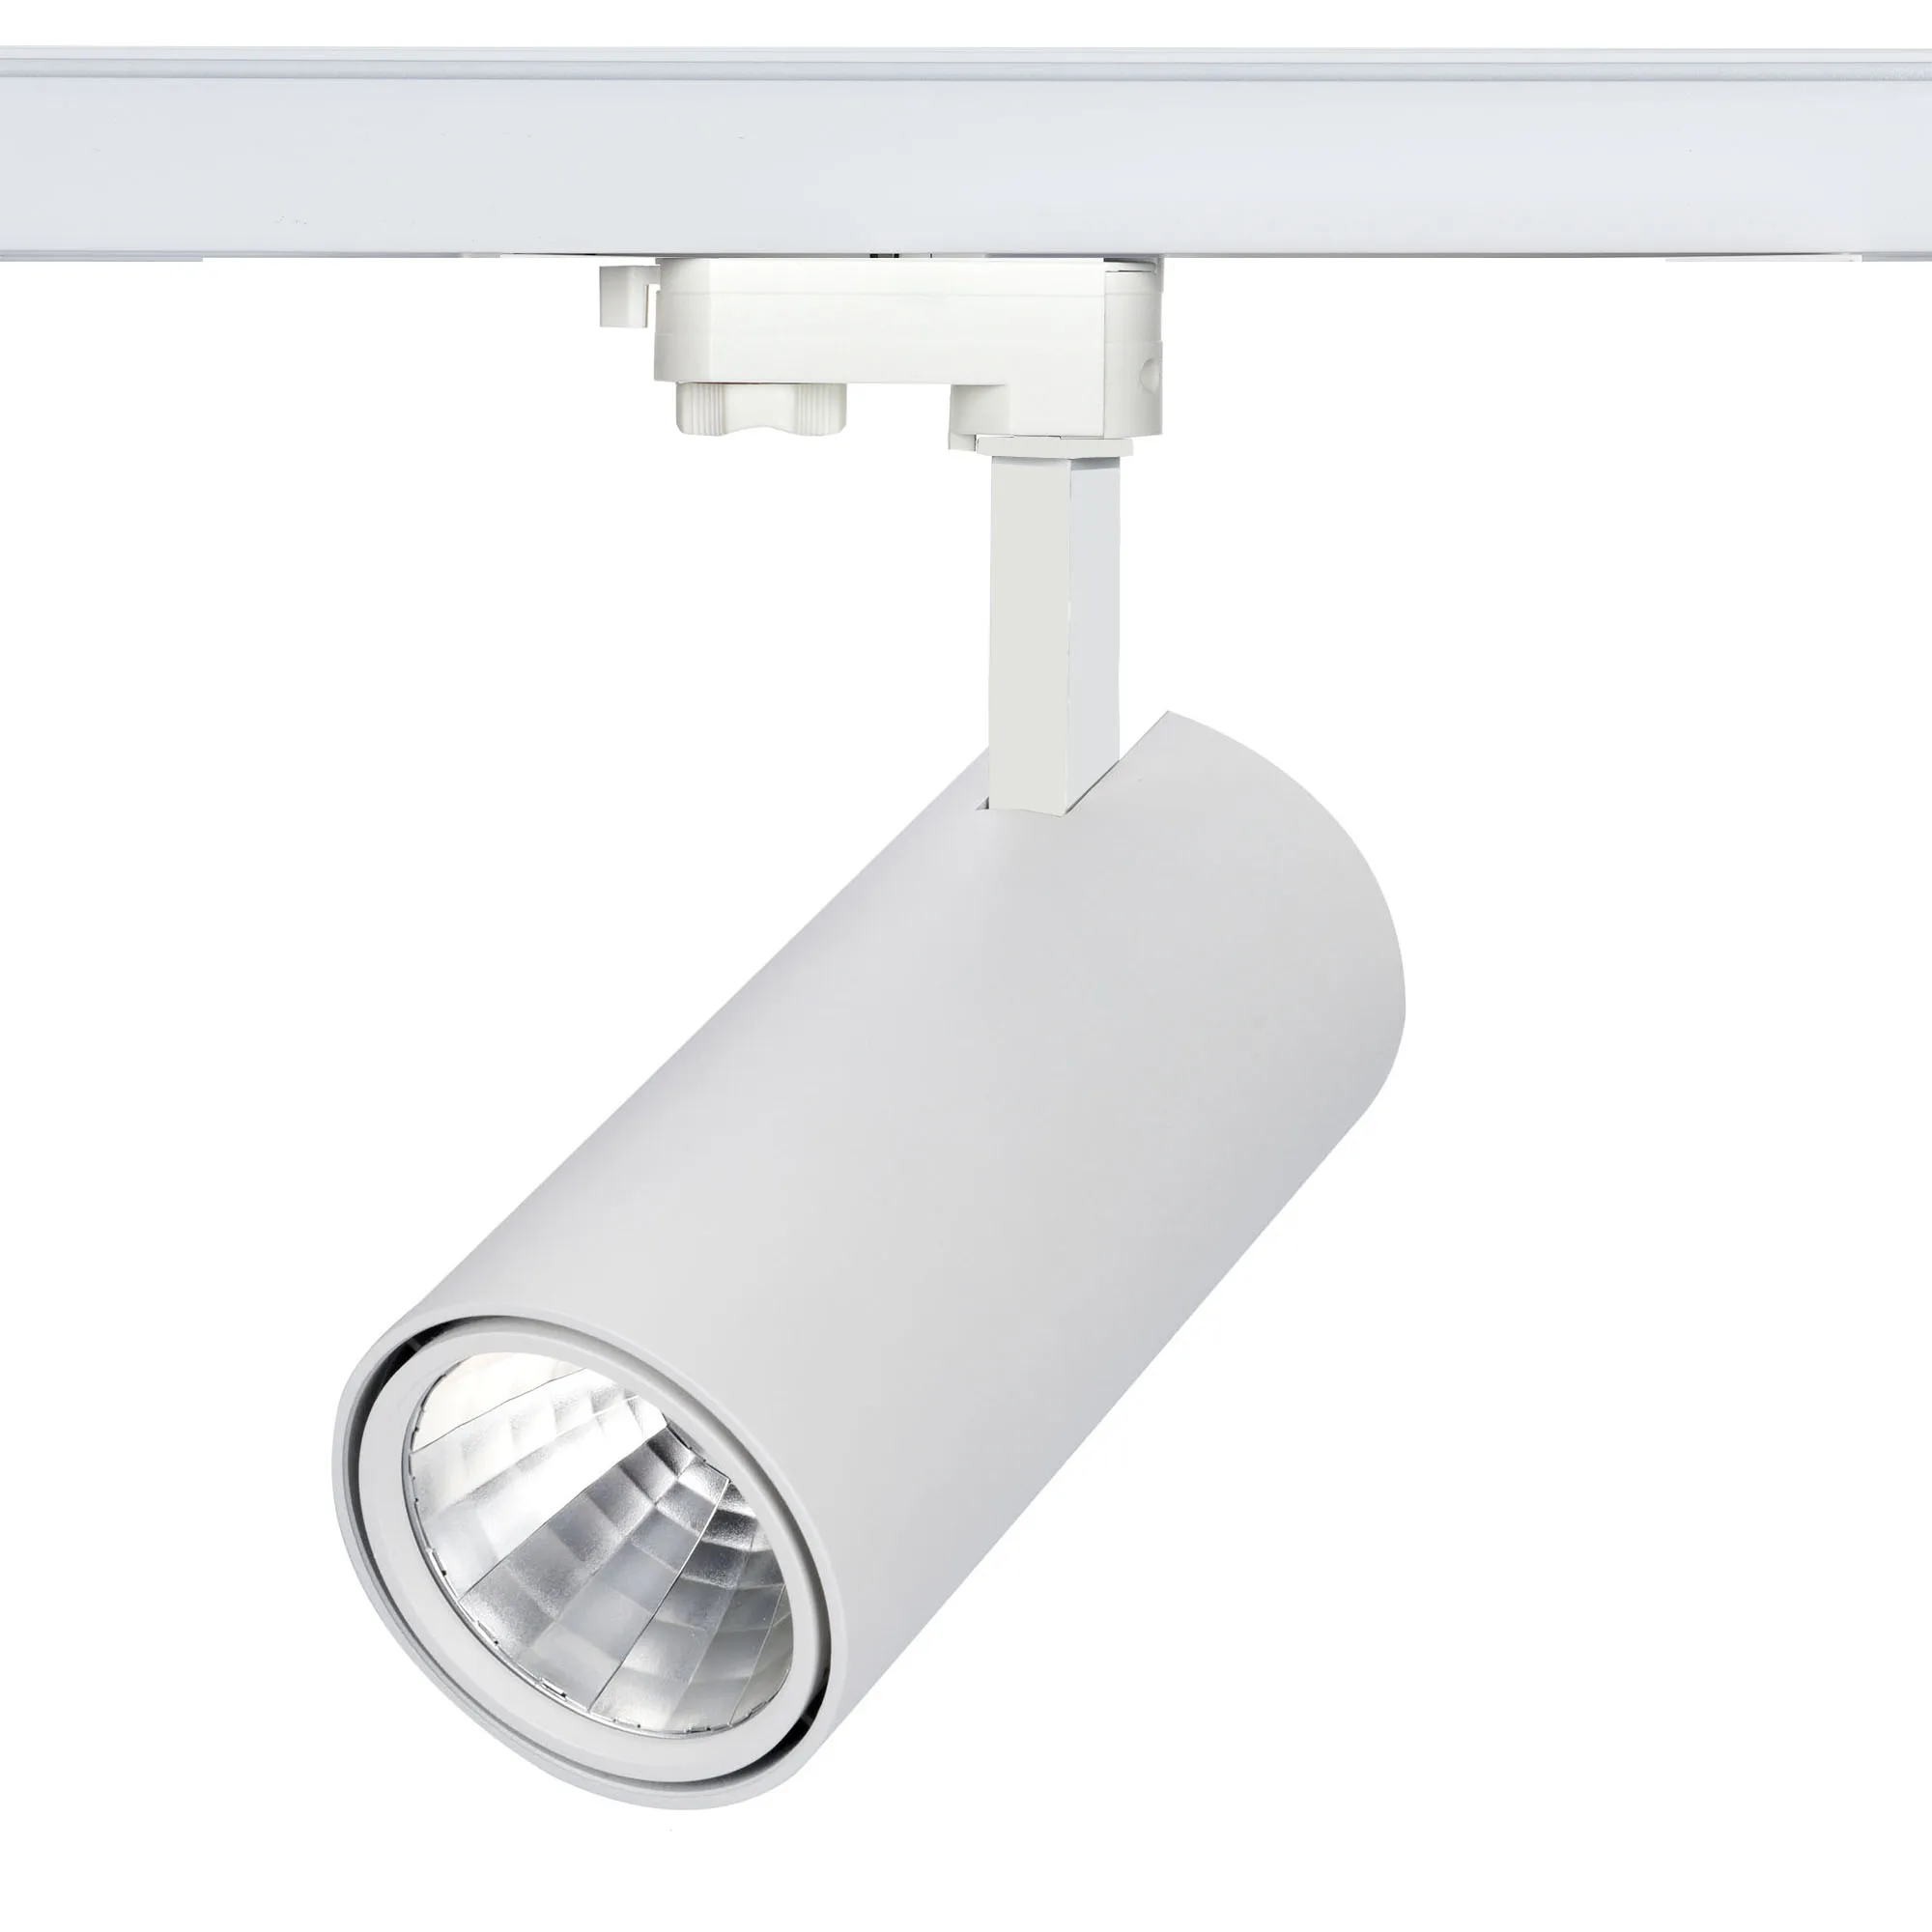 New product led track light for supermarket and office with good quality in low price